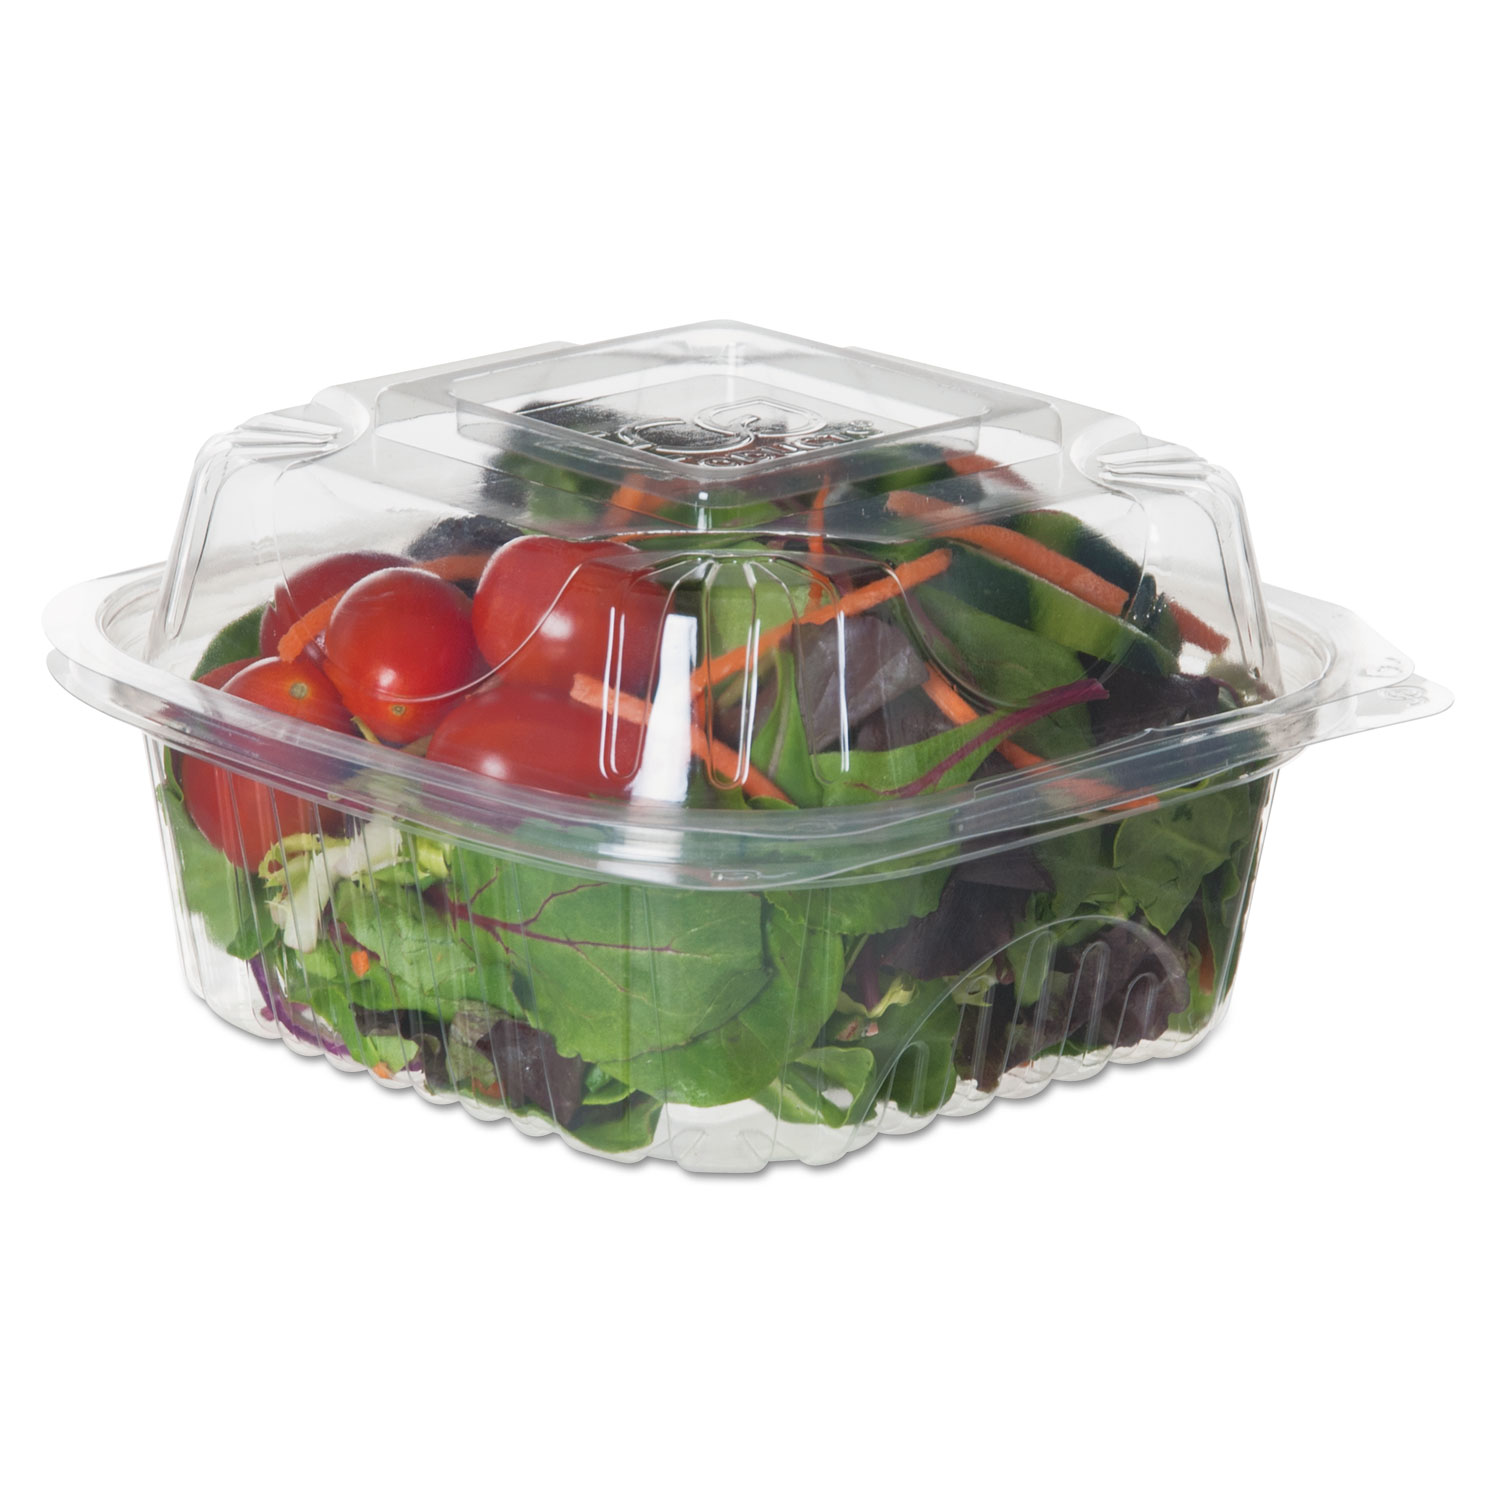  Eco-Products EP-LC6 Renewable and Compostable Clear Clamshells, 6 x 6 x 3, 80/Pack, 3 Packs/Carton (ECOEPLC6) 